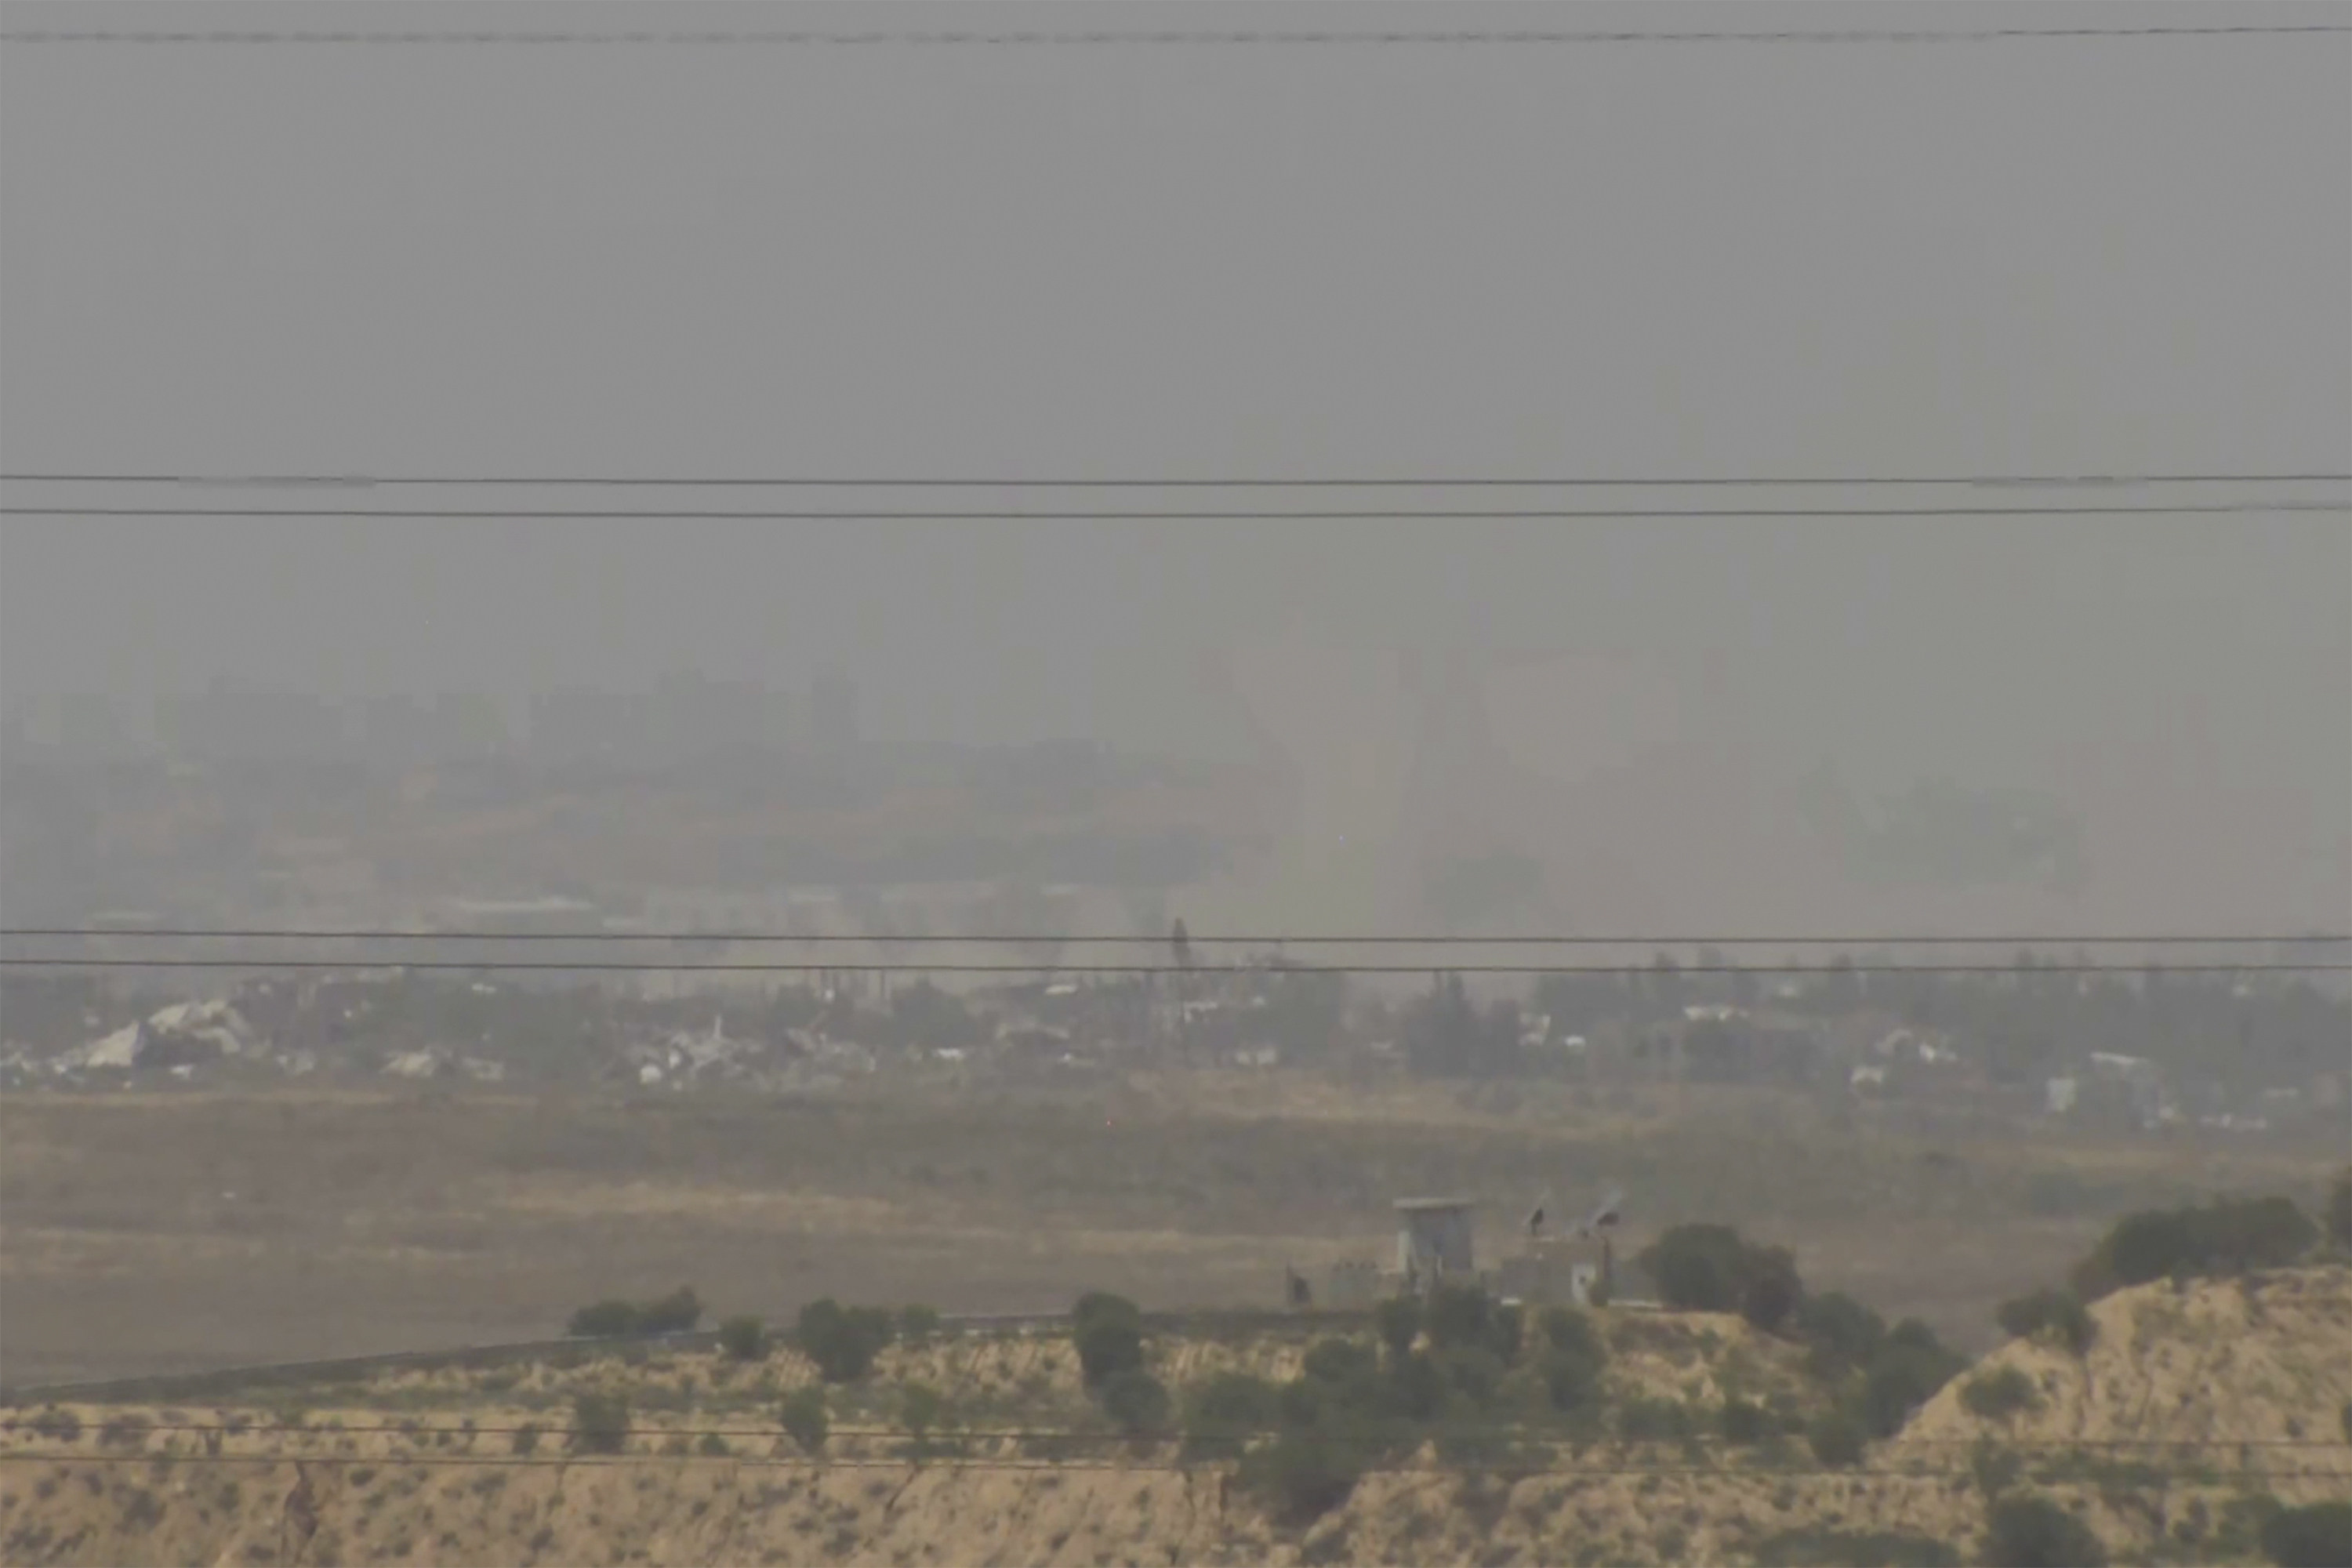 A screenshot from AP footage shows a general view of northern Gaza before equipment for the live feed was it was seized by Israeli officials on Tuesday. Photo: AP